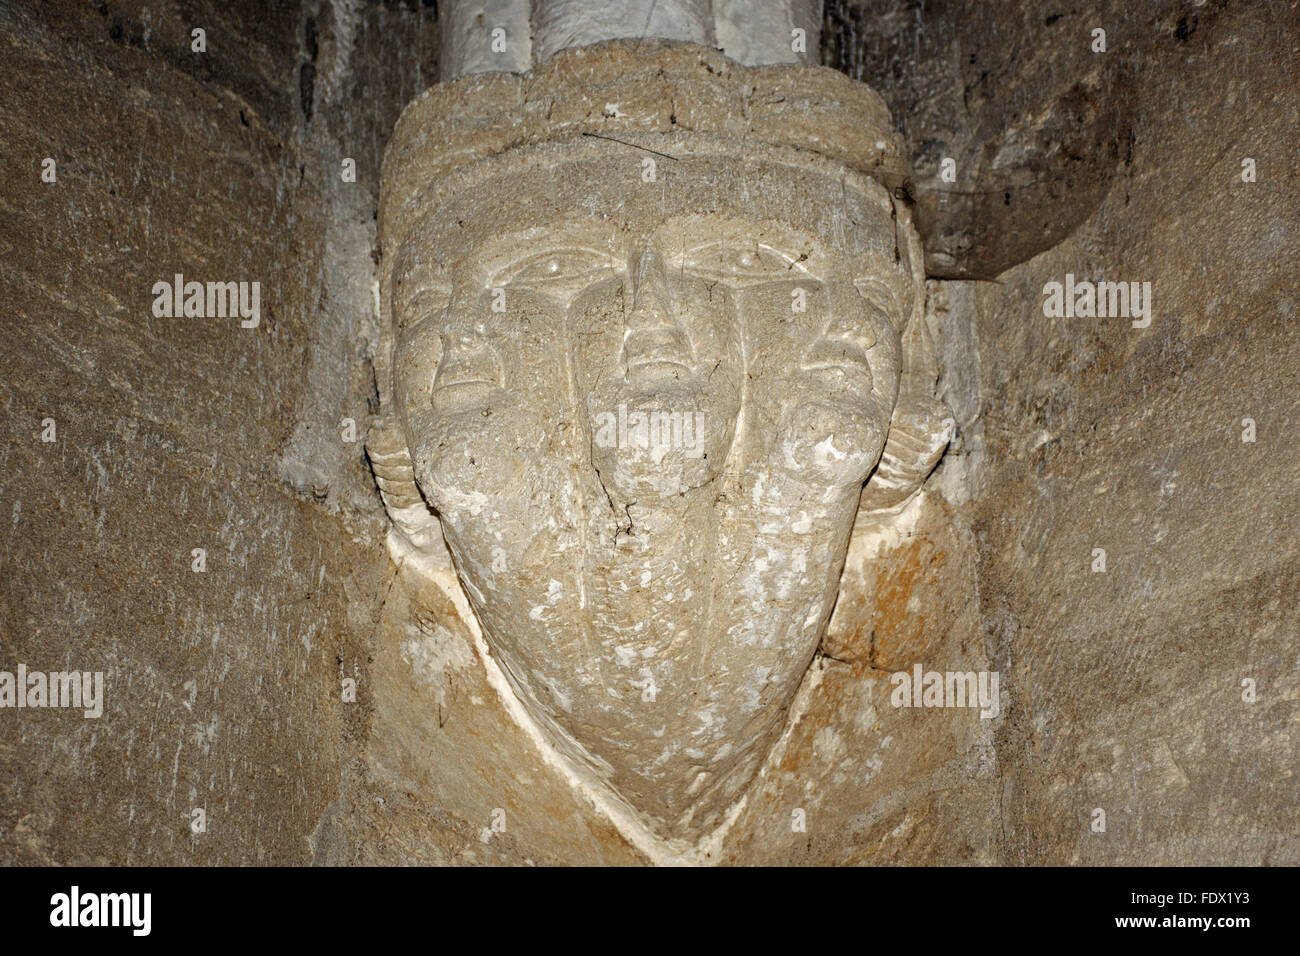 Trifron (three headed personnage) in the Eglise d'Aujac, Charentes. Stock Photo